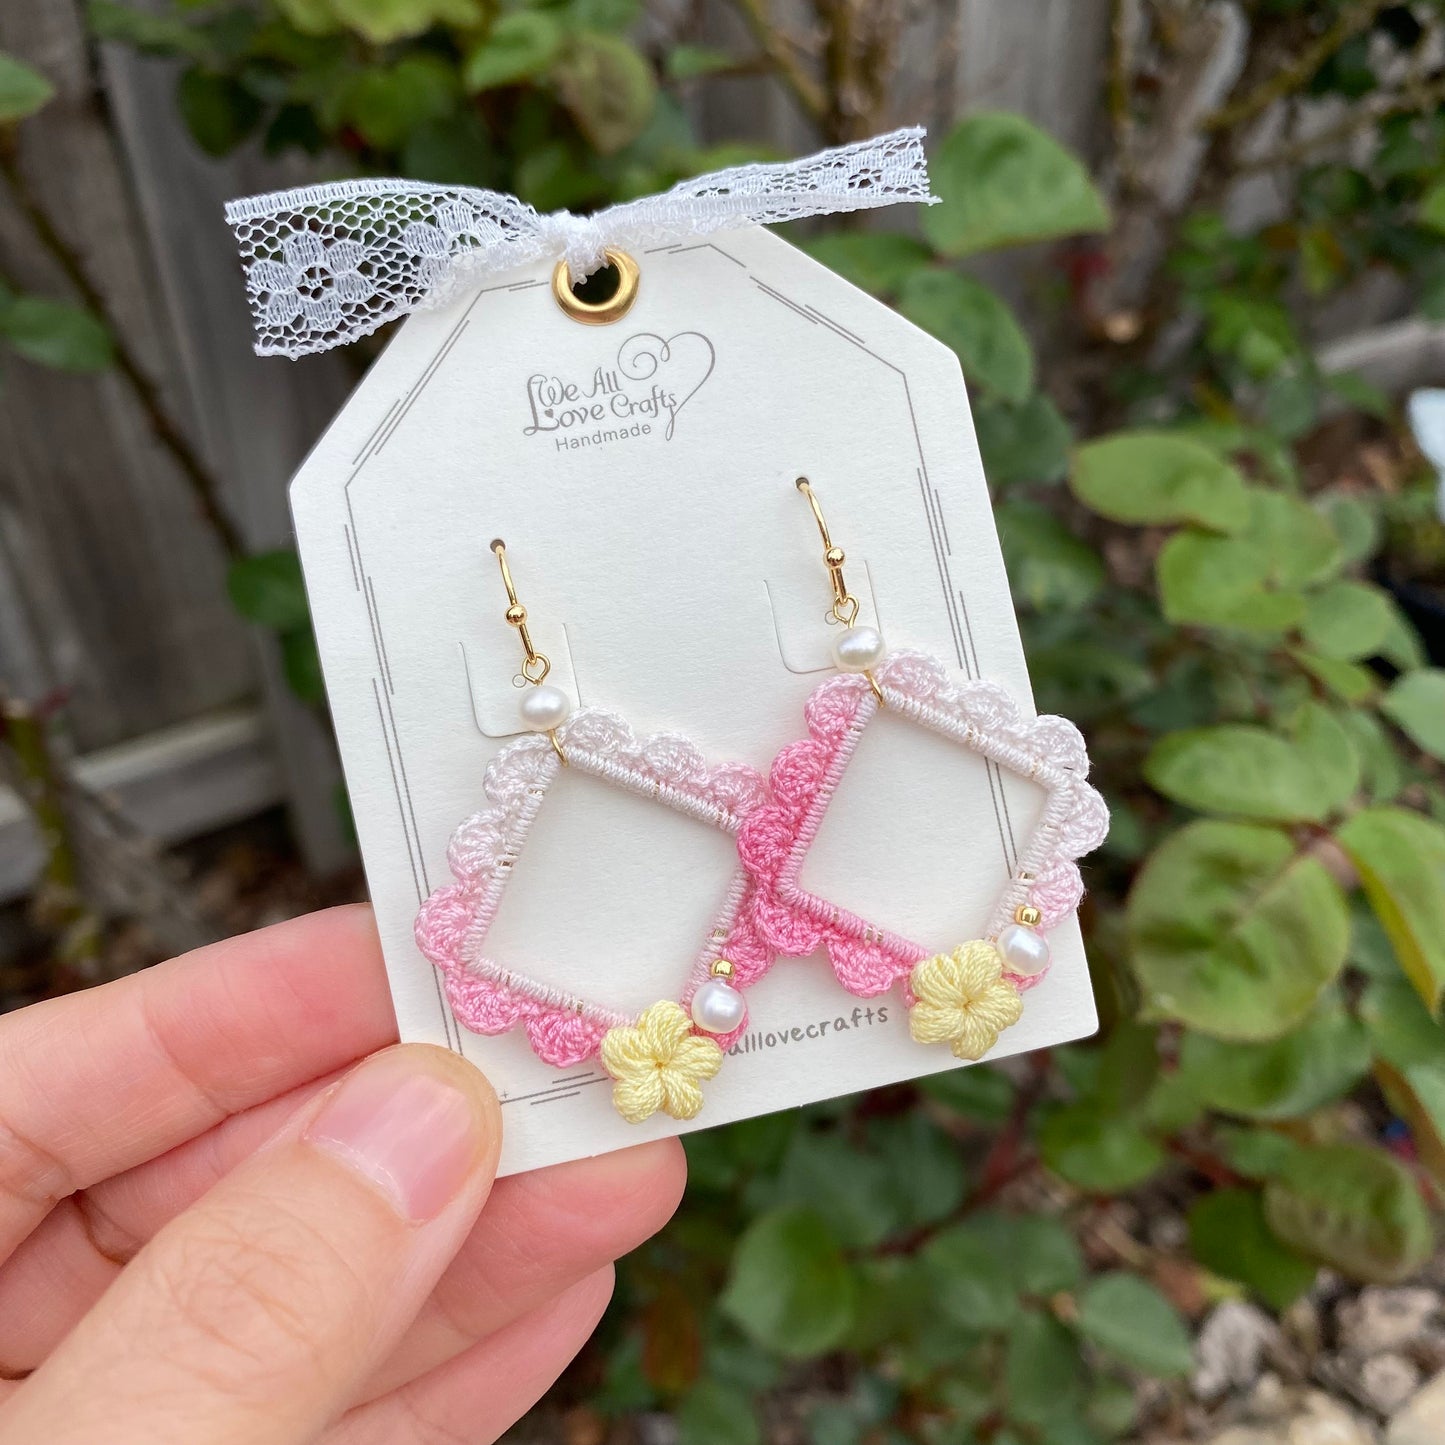 Ombre Pink with yellow flower and pearl crochet earrings in square shape/Microcrochet /dangle geometry jewelry/gift for her/Ship from US